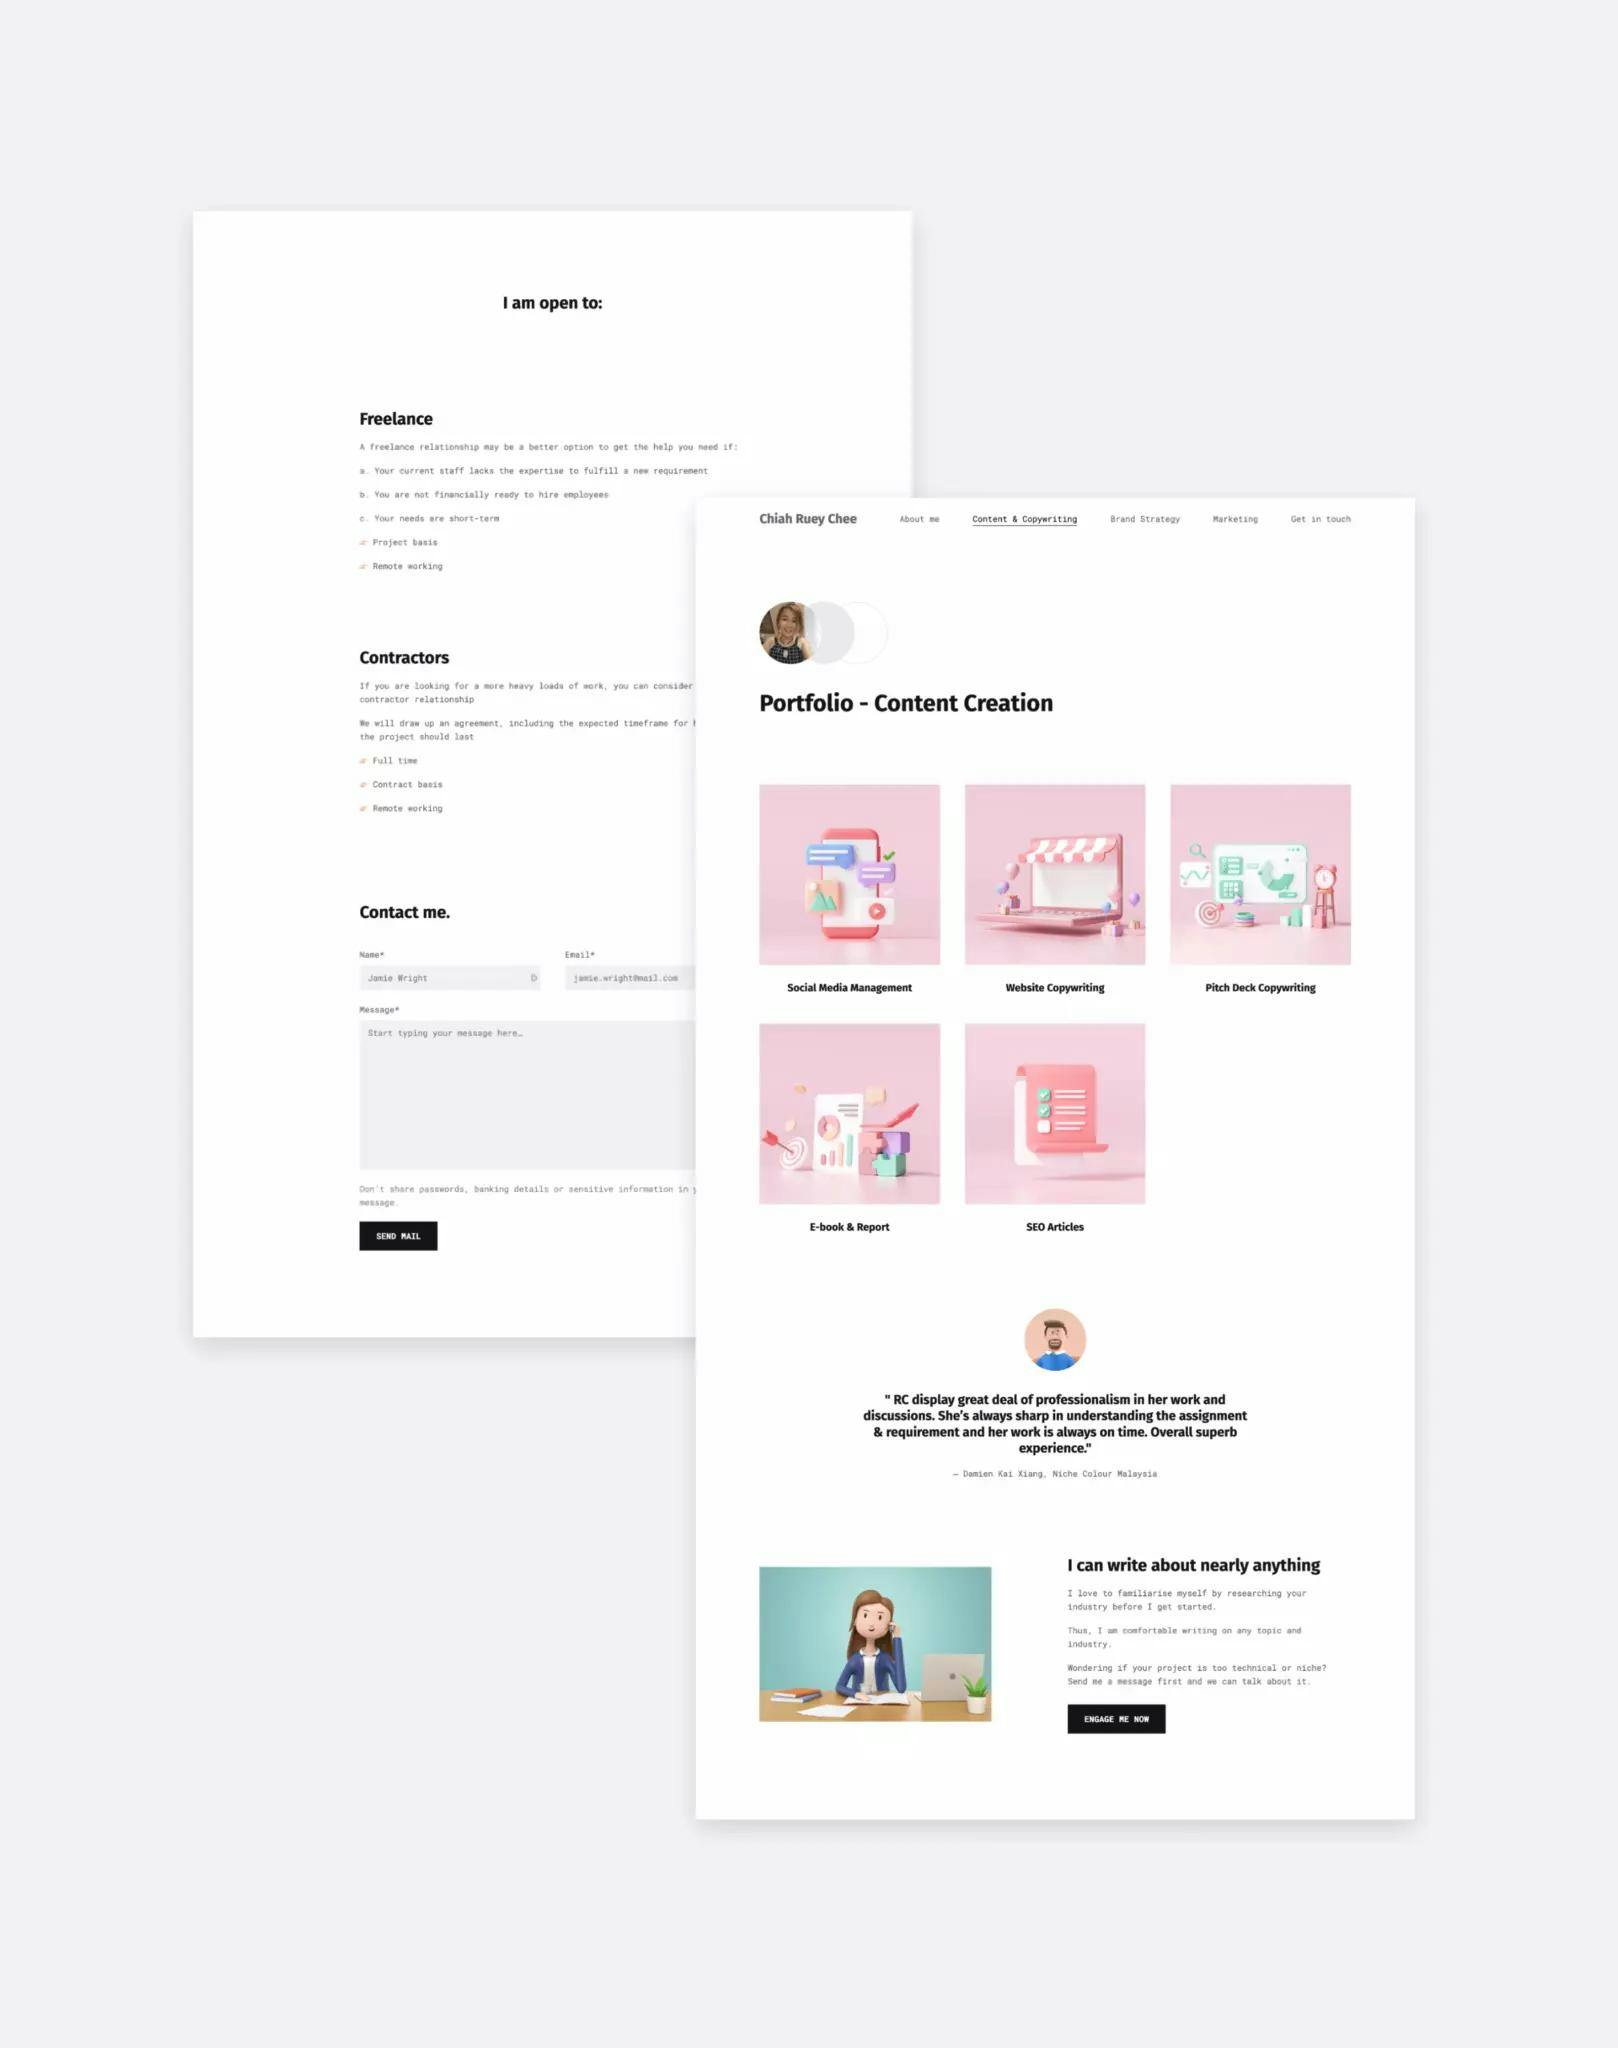 The portfolio page of Chiah Ruey Chee, showcasing copywriting projects with matching pink thumnails